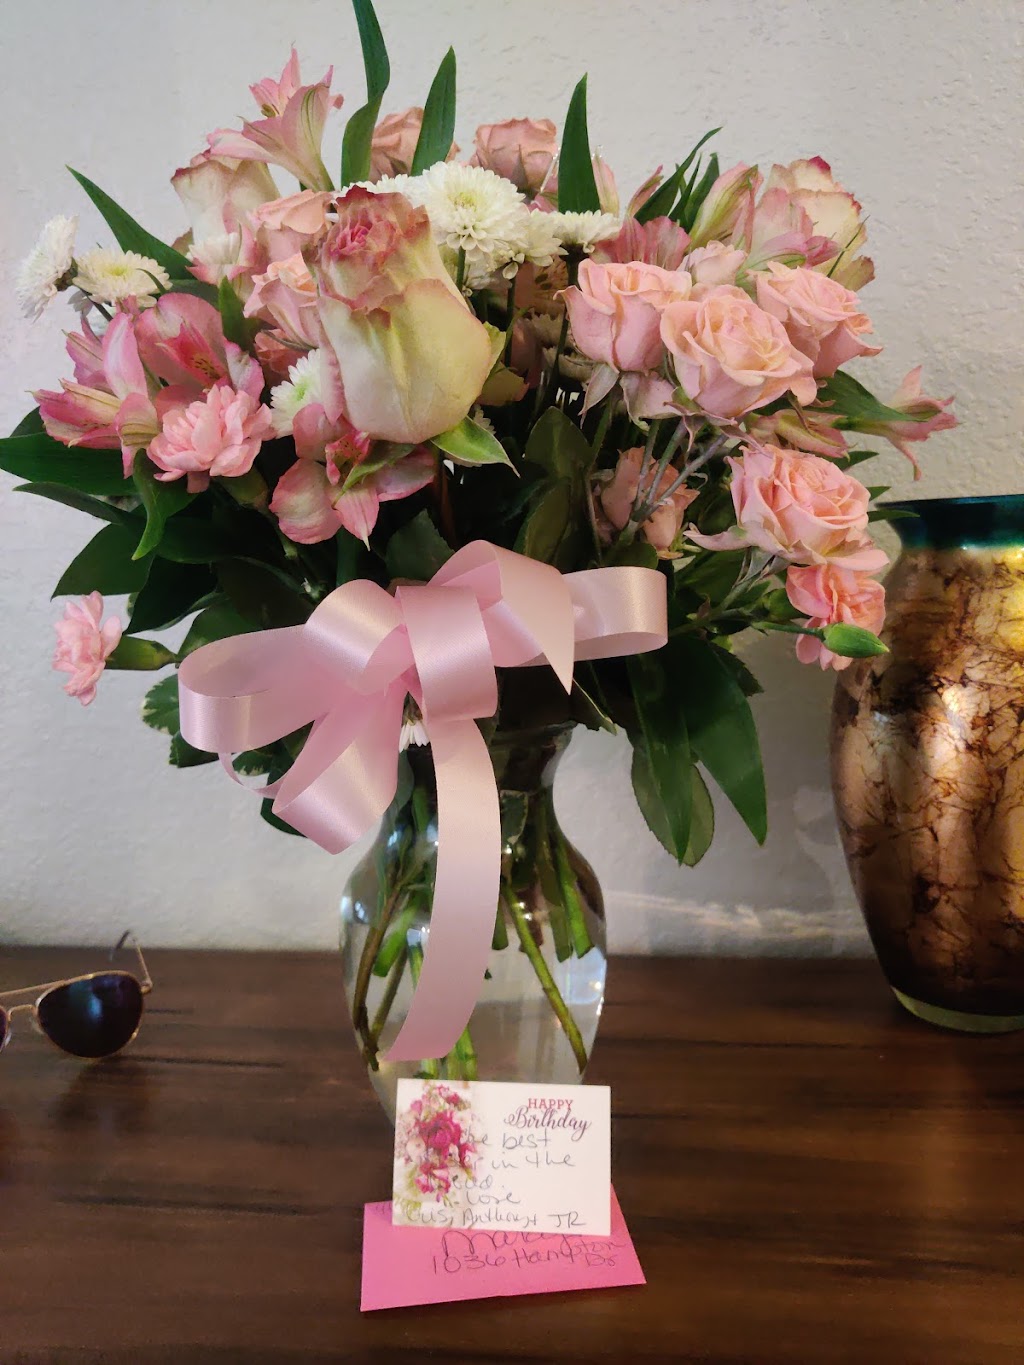 Kims Creations Flowers | 10010 Antelope Way, Forney, TX 75126 | Phone: (972) 357-7687